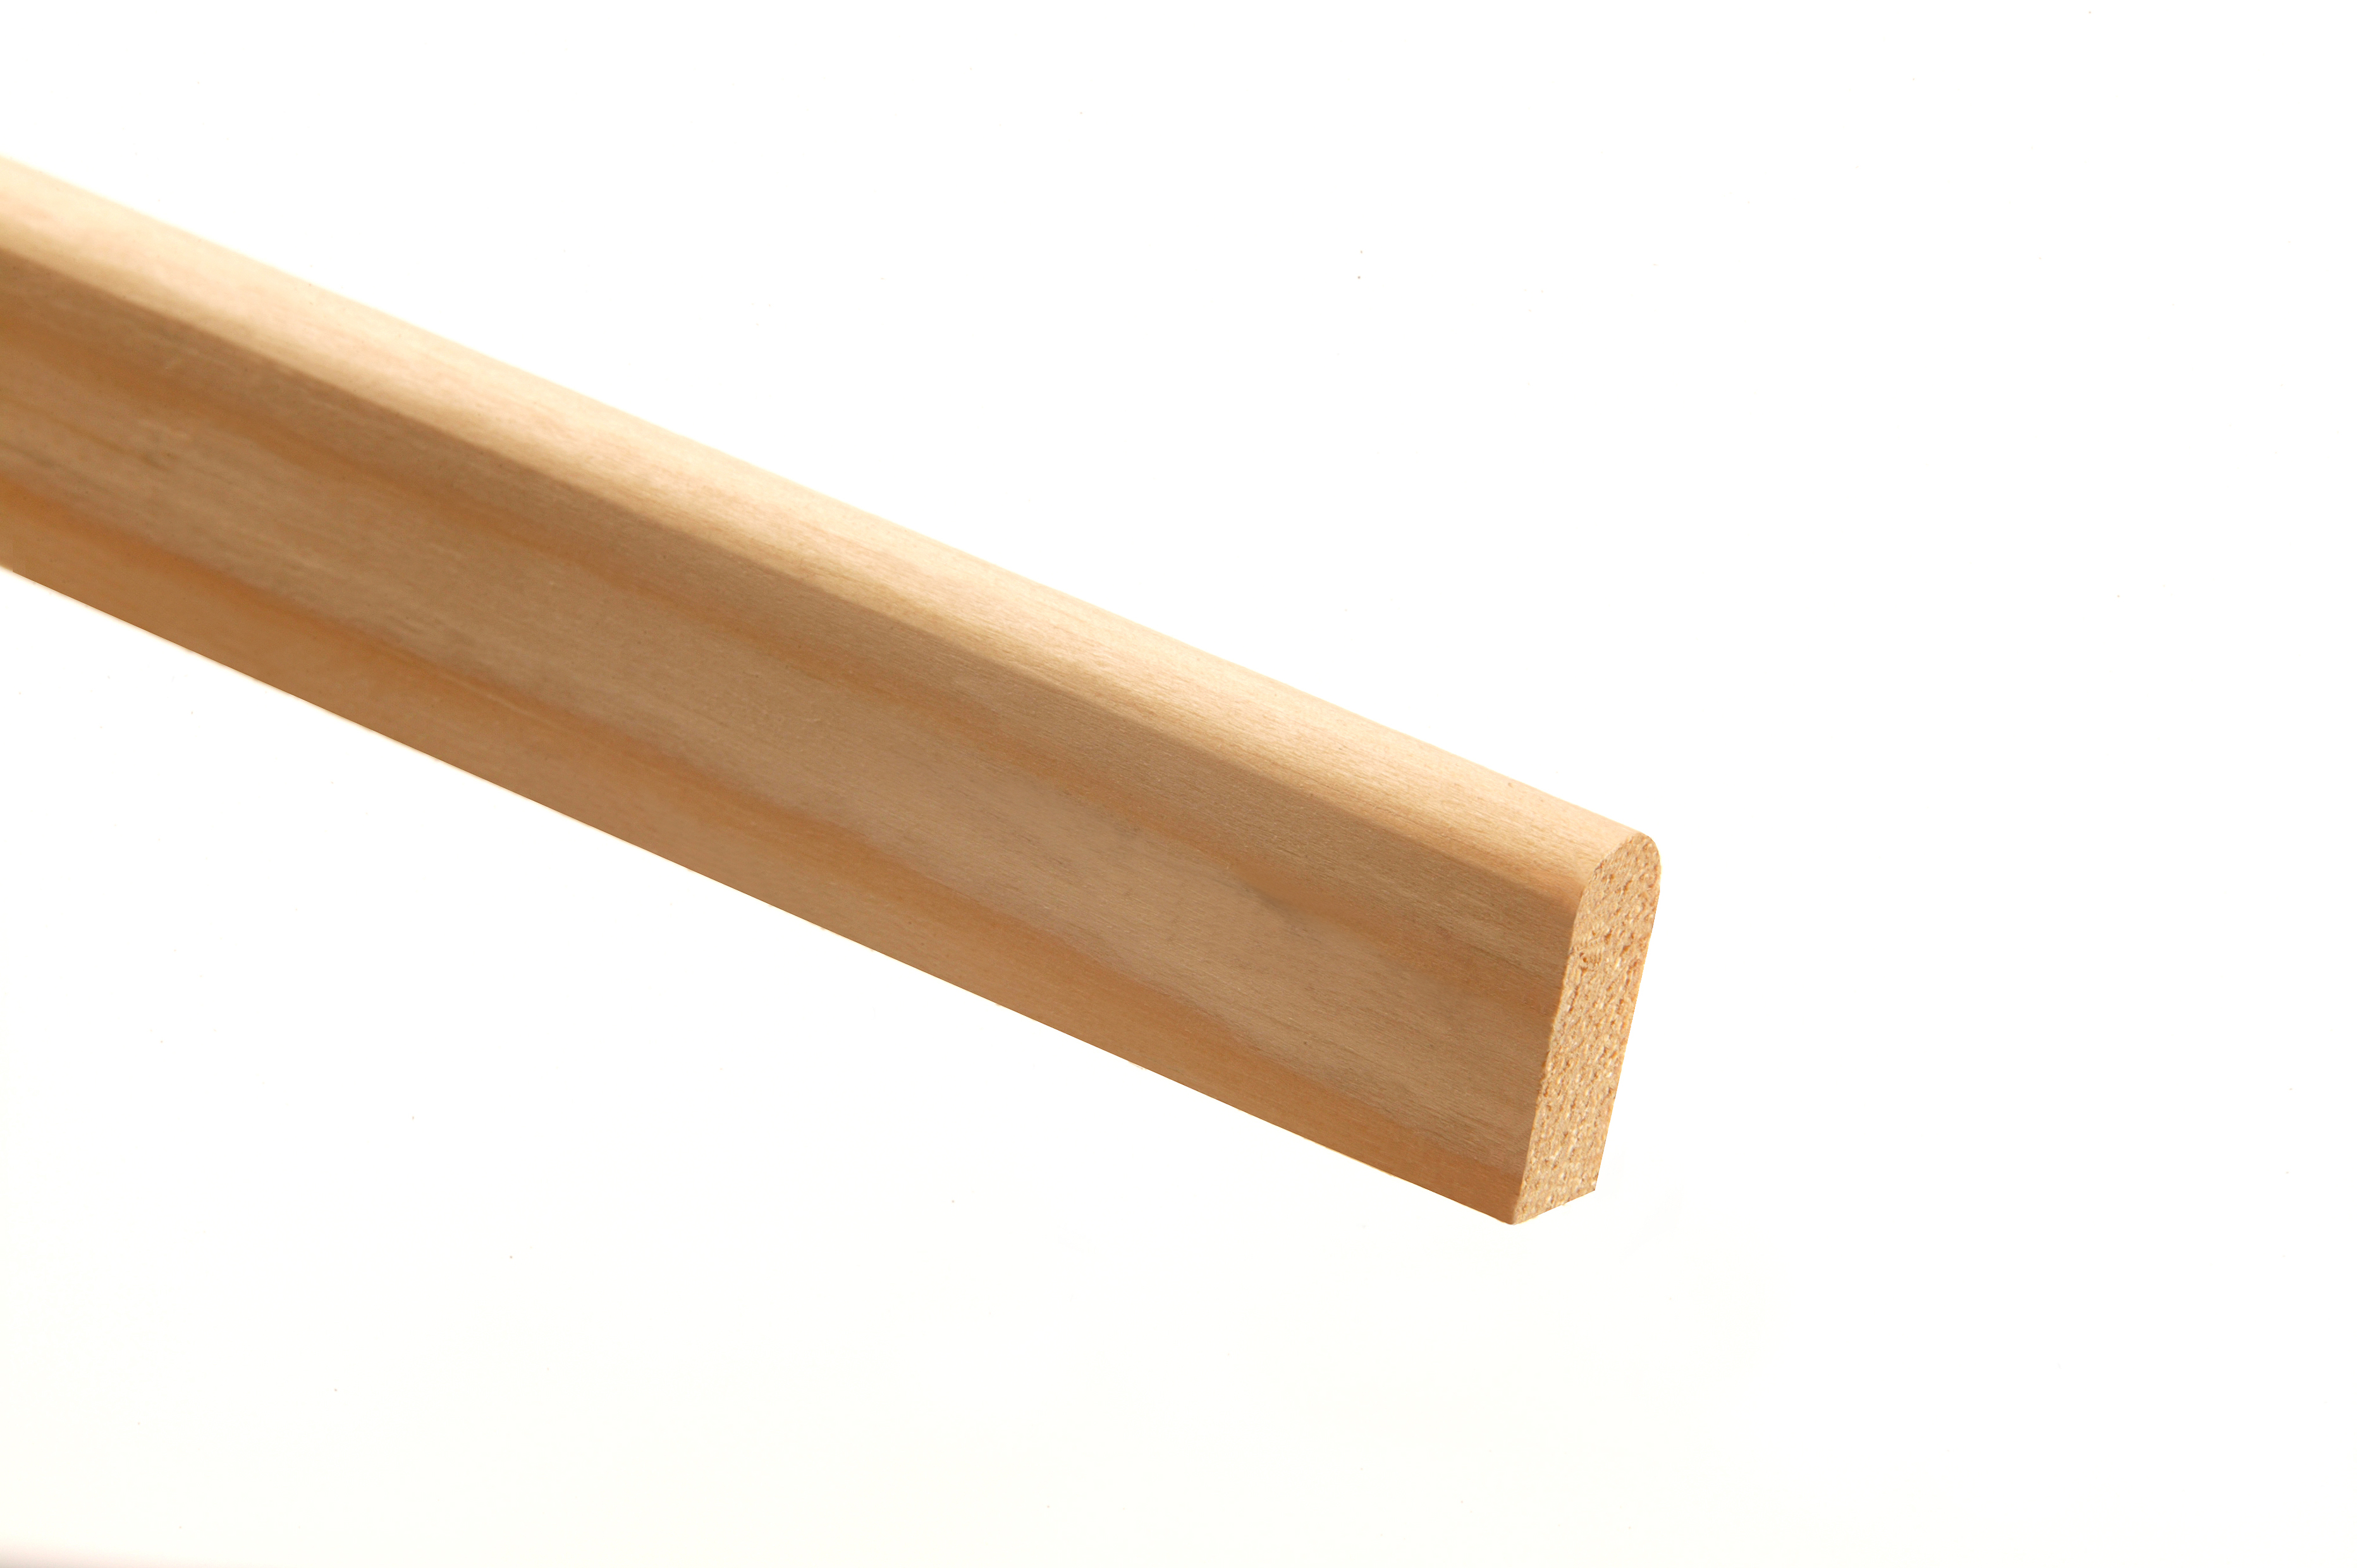 20 Pine Parting Bead Mouldings 8 x 20 x 2400mm